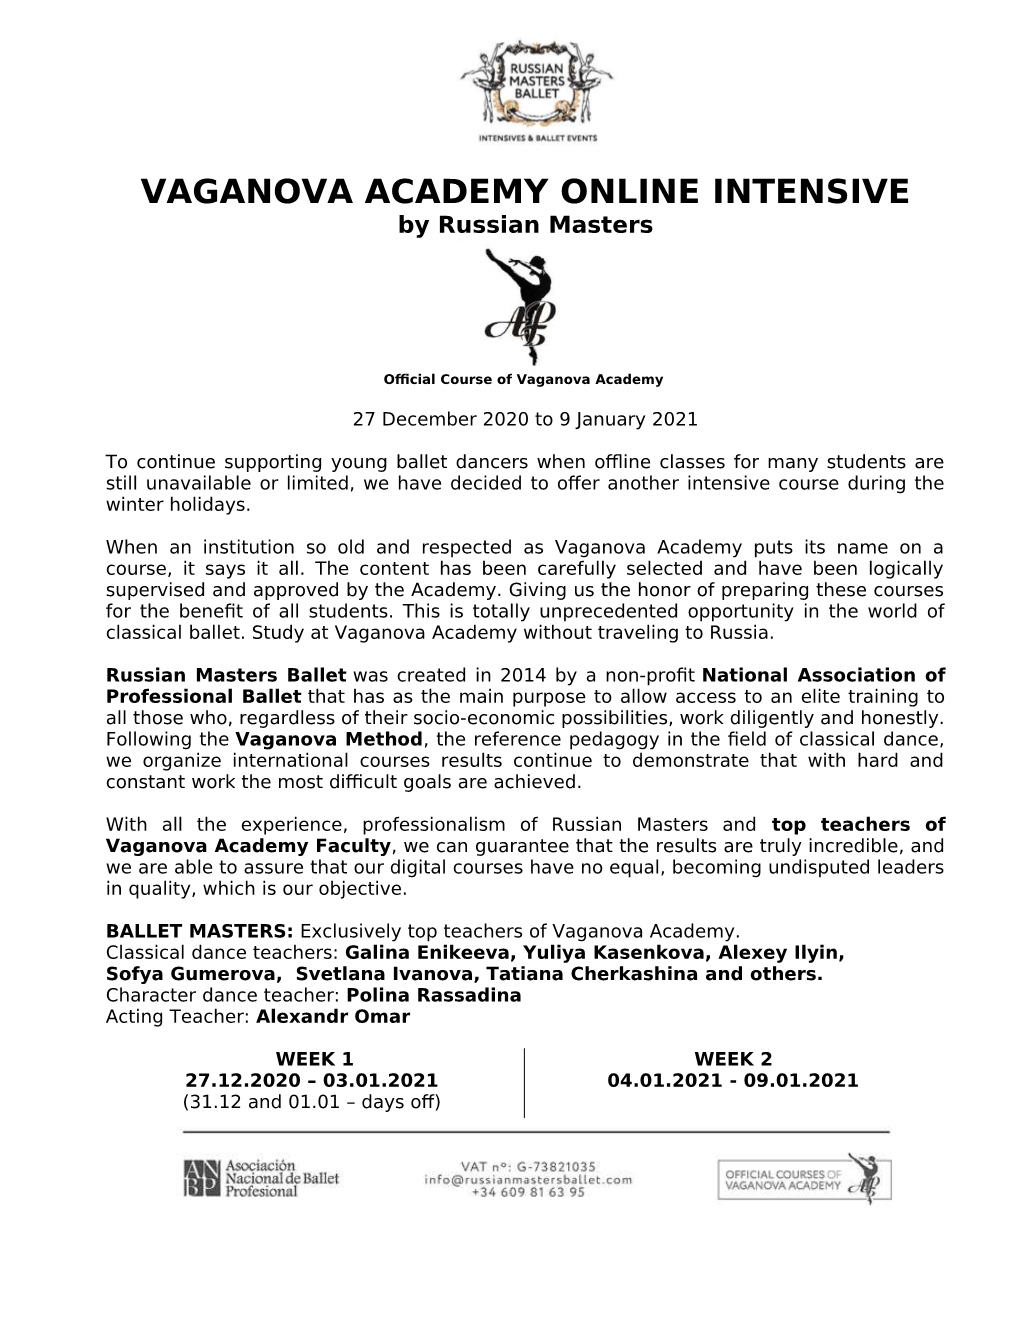 VAGANOVA ACADEMY ONLINE INTENSIVE by Russian Masters